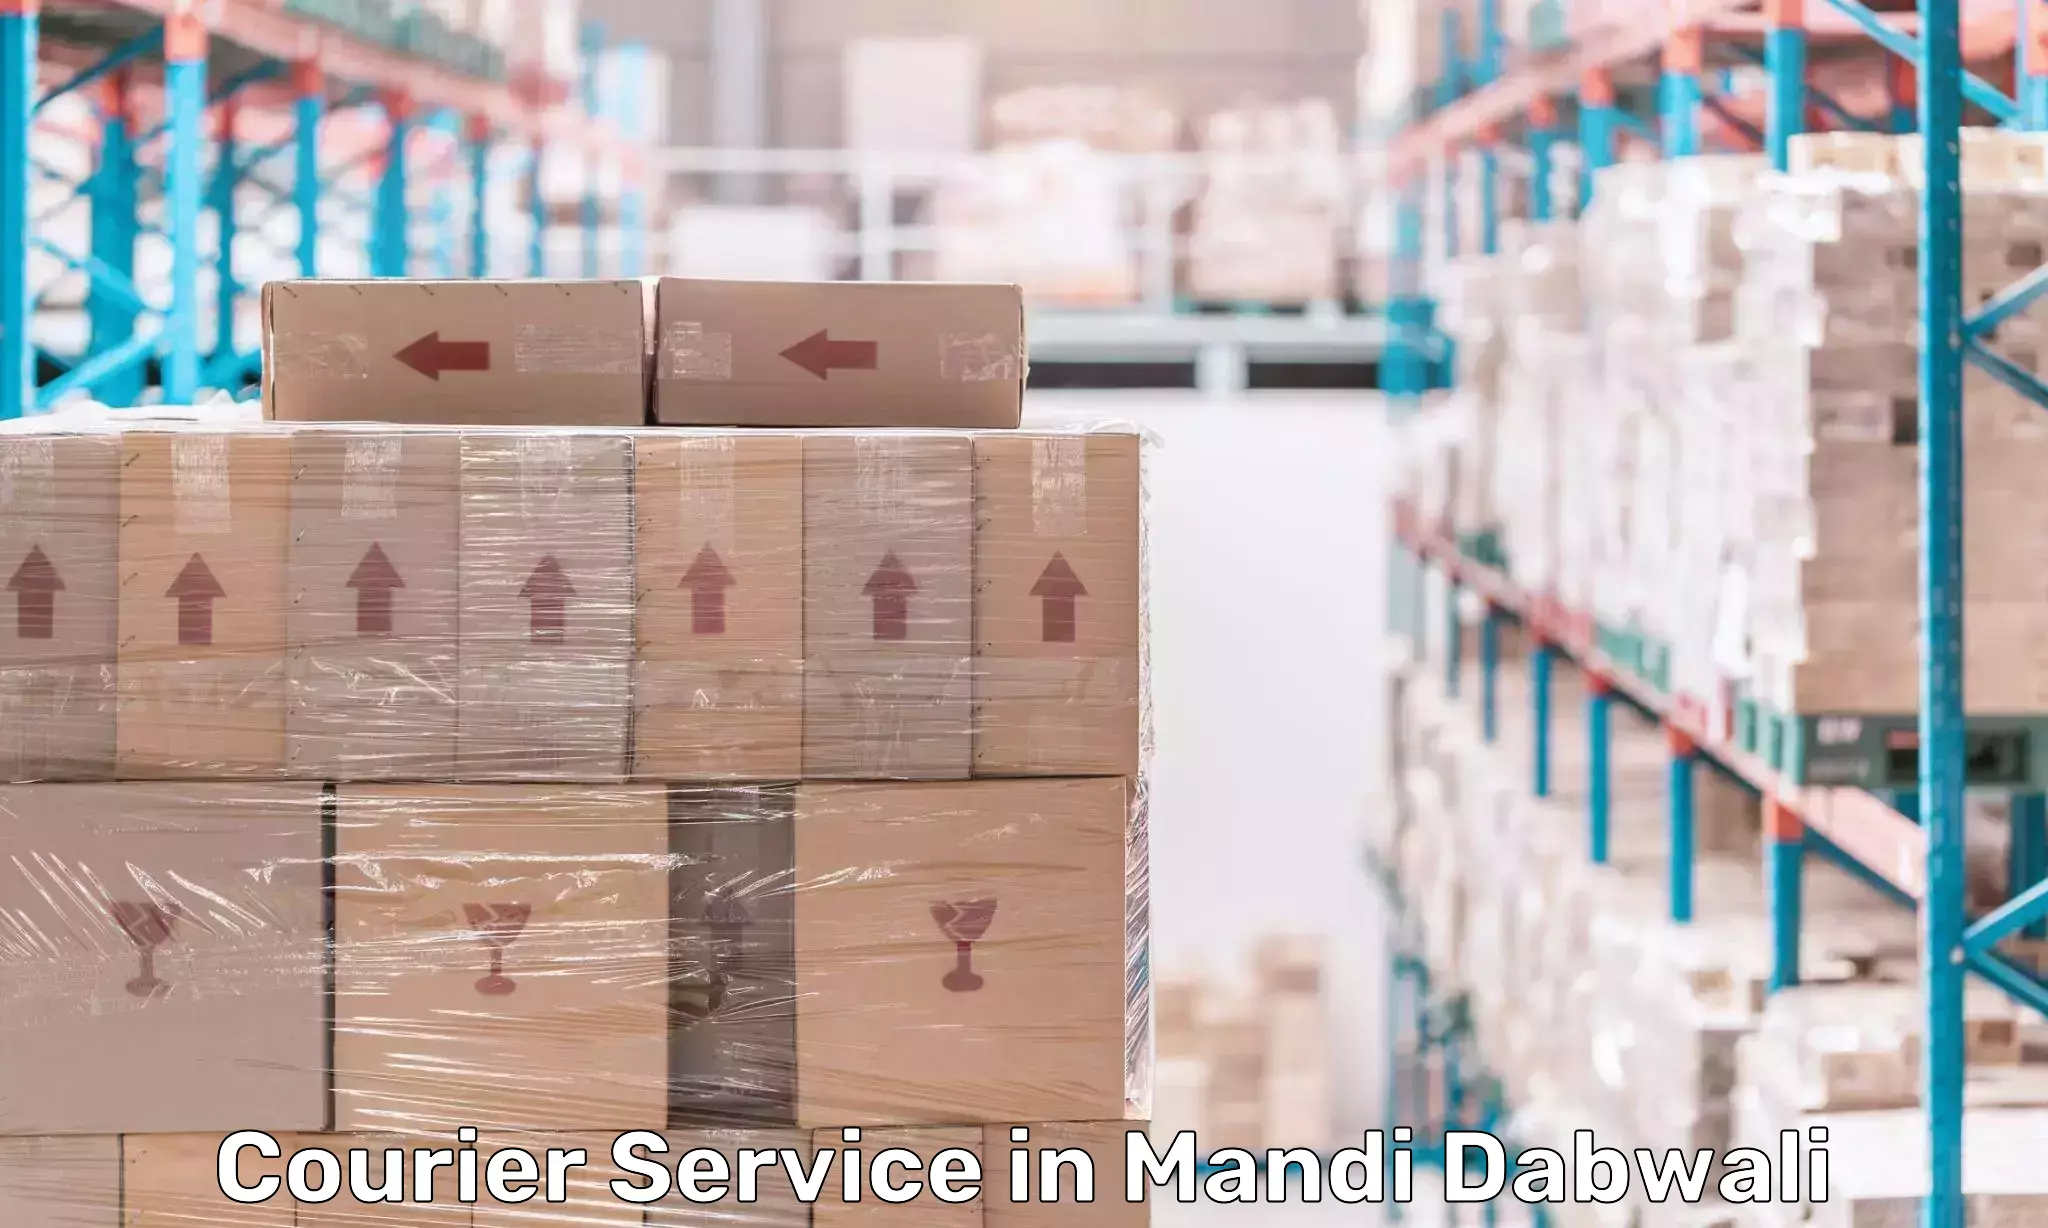 Fastest parcel delivery in Mandi Dabwali